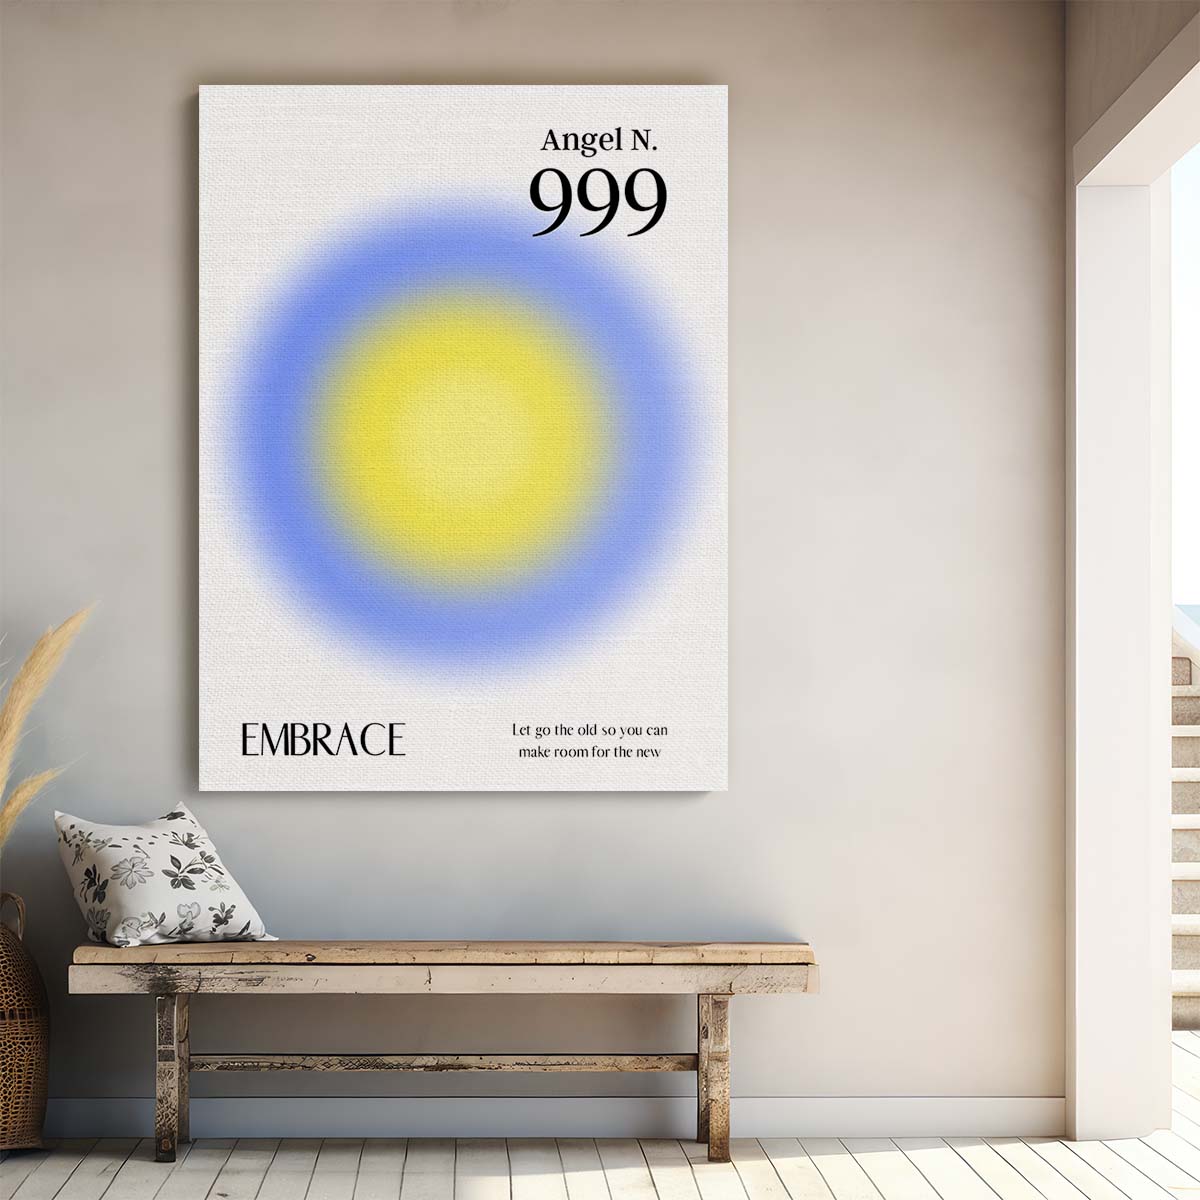 Colorful Angel Number 999 Illustration Positive Energy Manifestation Poster by Luxuriance Designs, made in USA